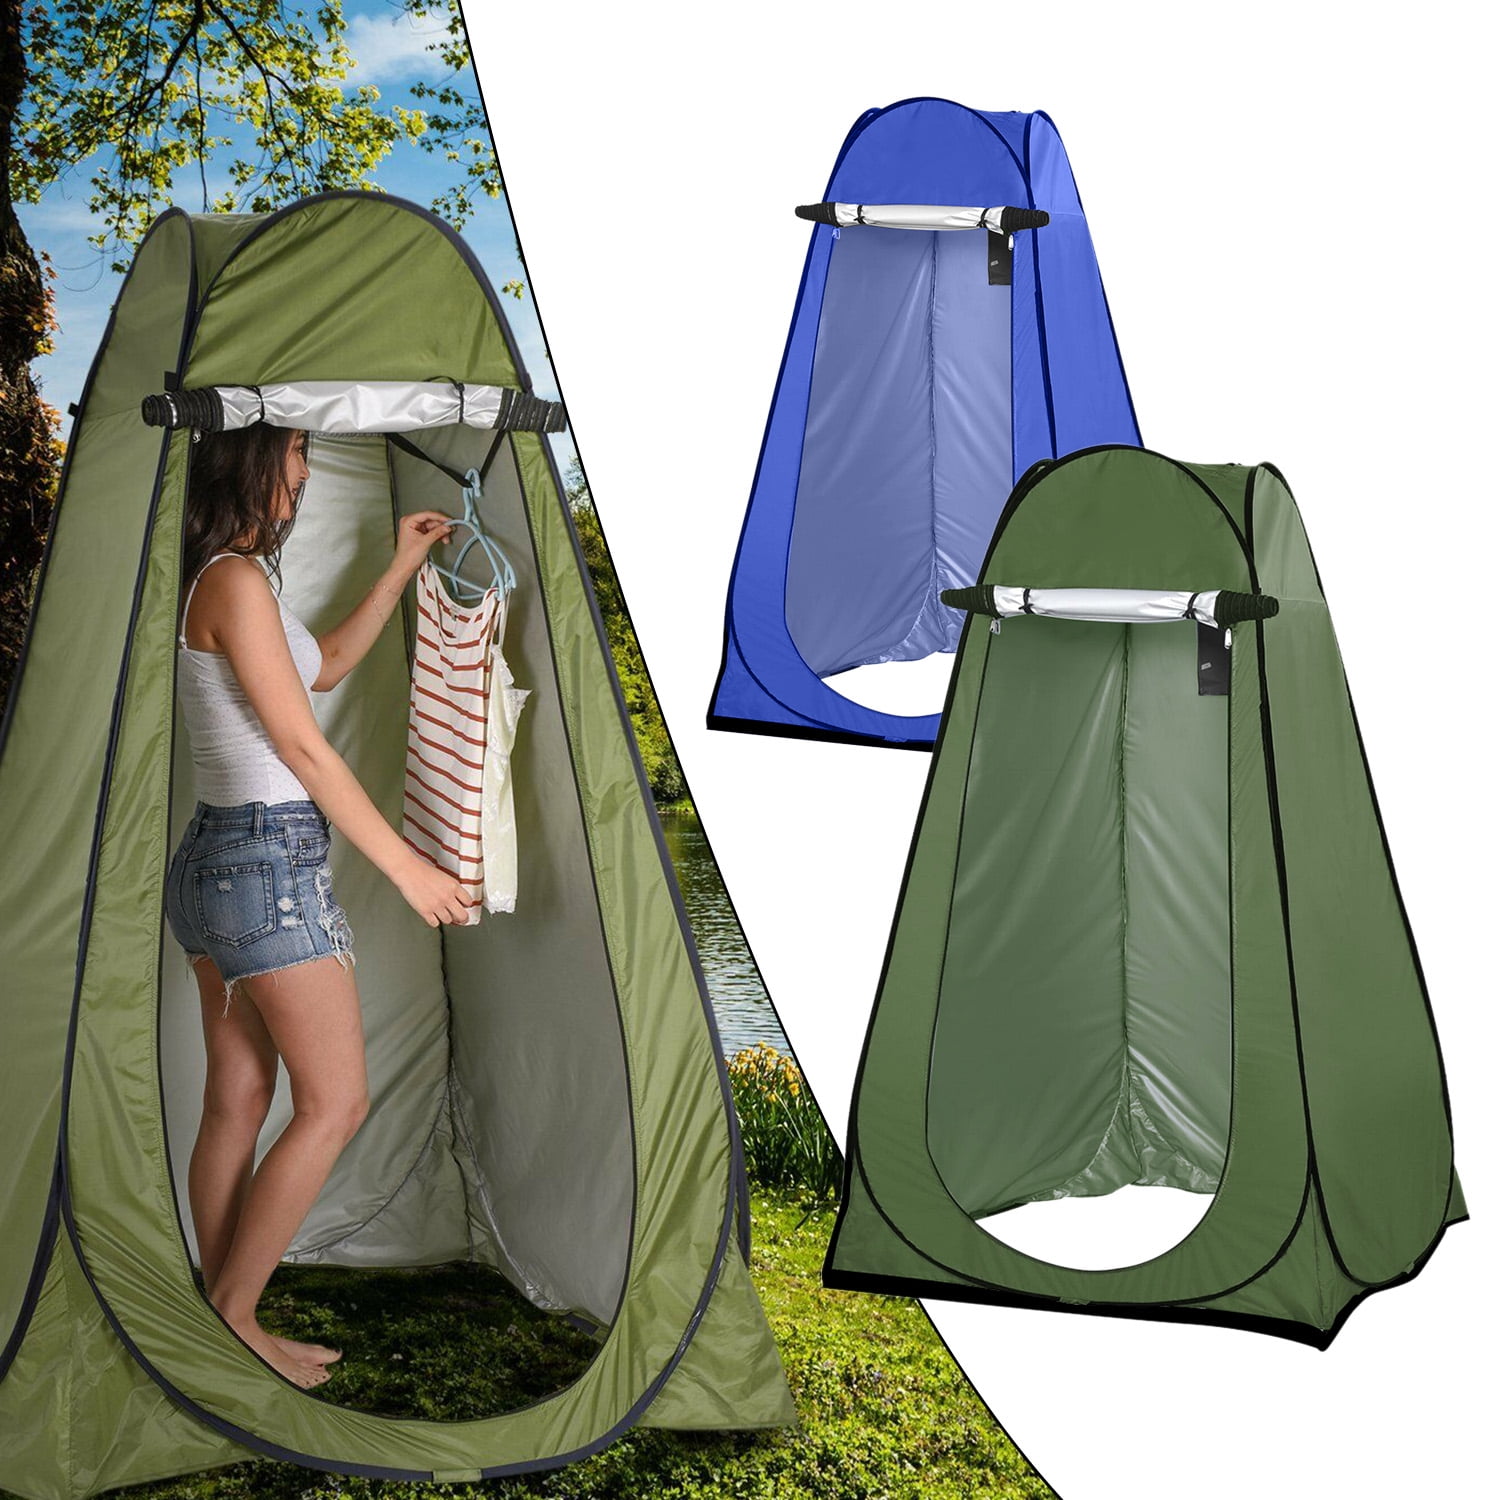 Outdoor Pop-Up Shower Privacy Shelter Tent Beach Isolation Sun Shelter Portable Outdoor Changing Tent Waterproof Privacy Shower Tent Changing Dress Room for Camping